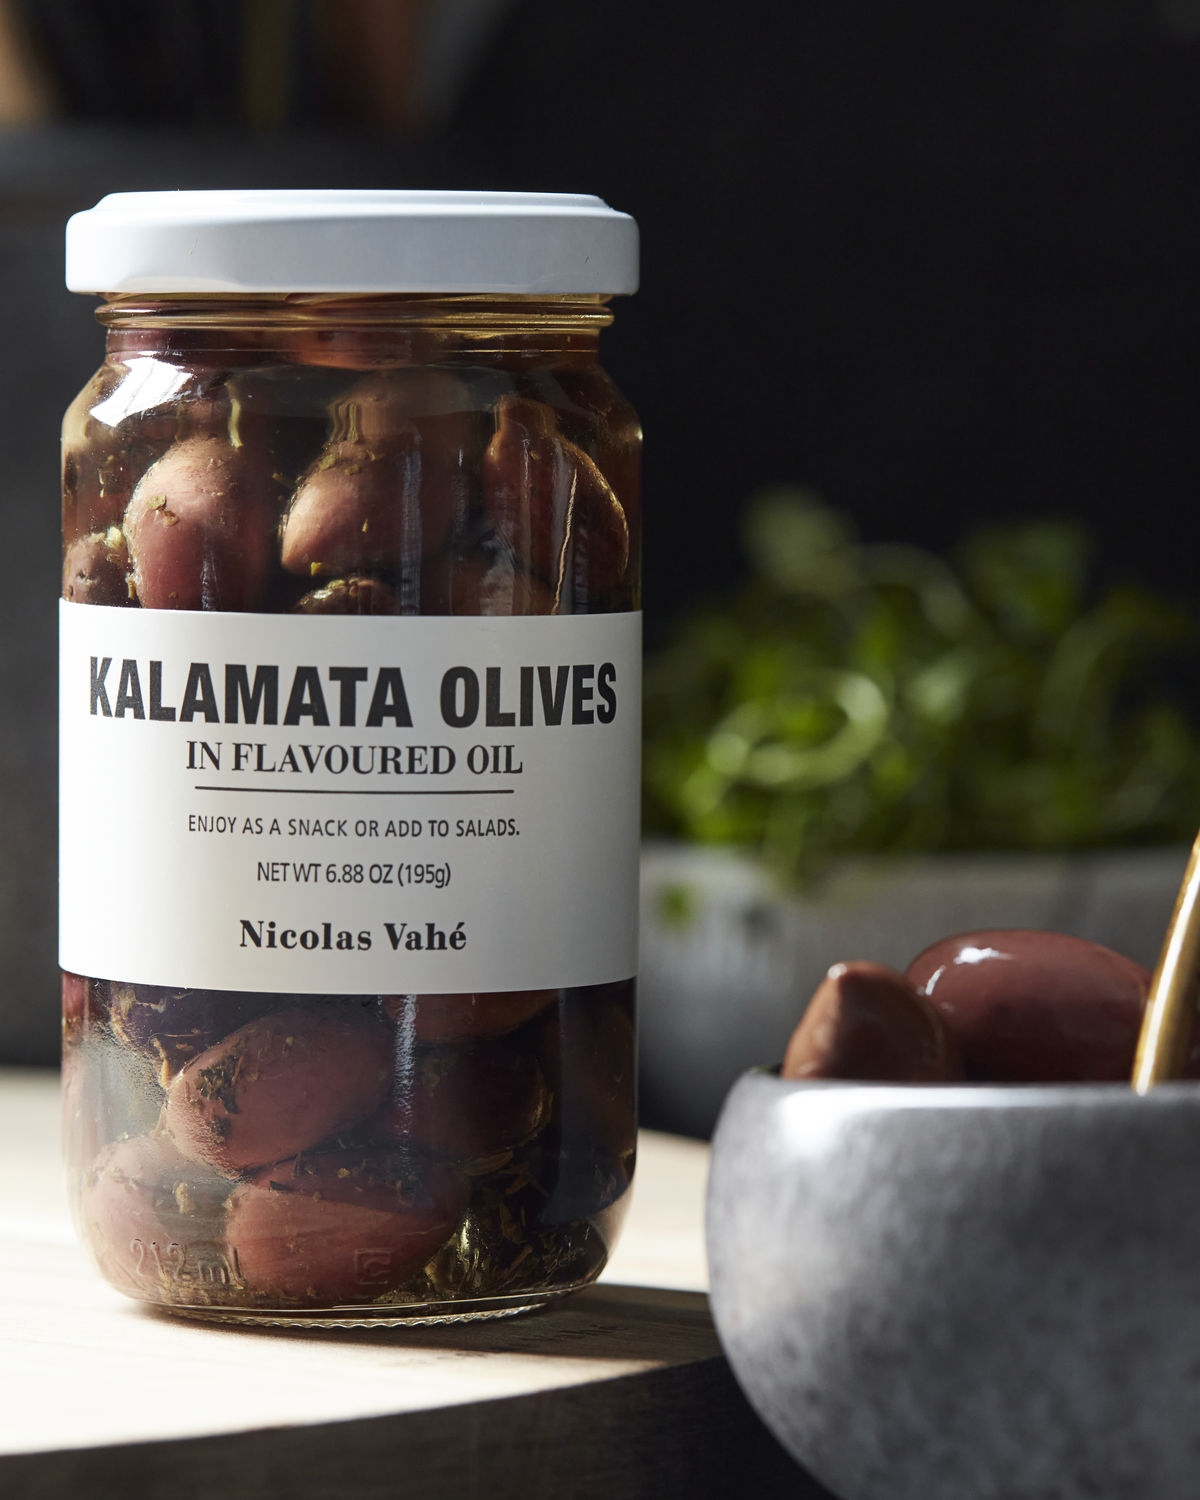 Kalamata Olives, in flavoured oil, 195 g.